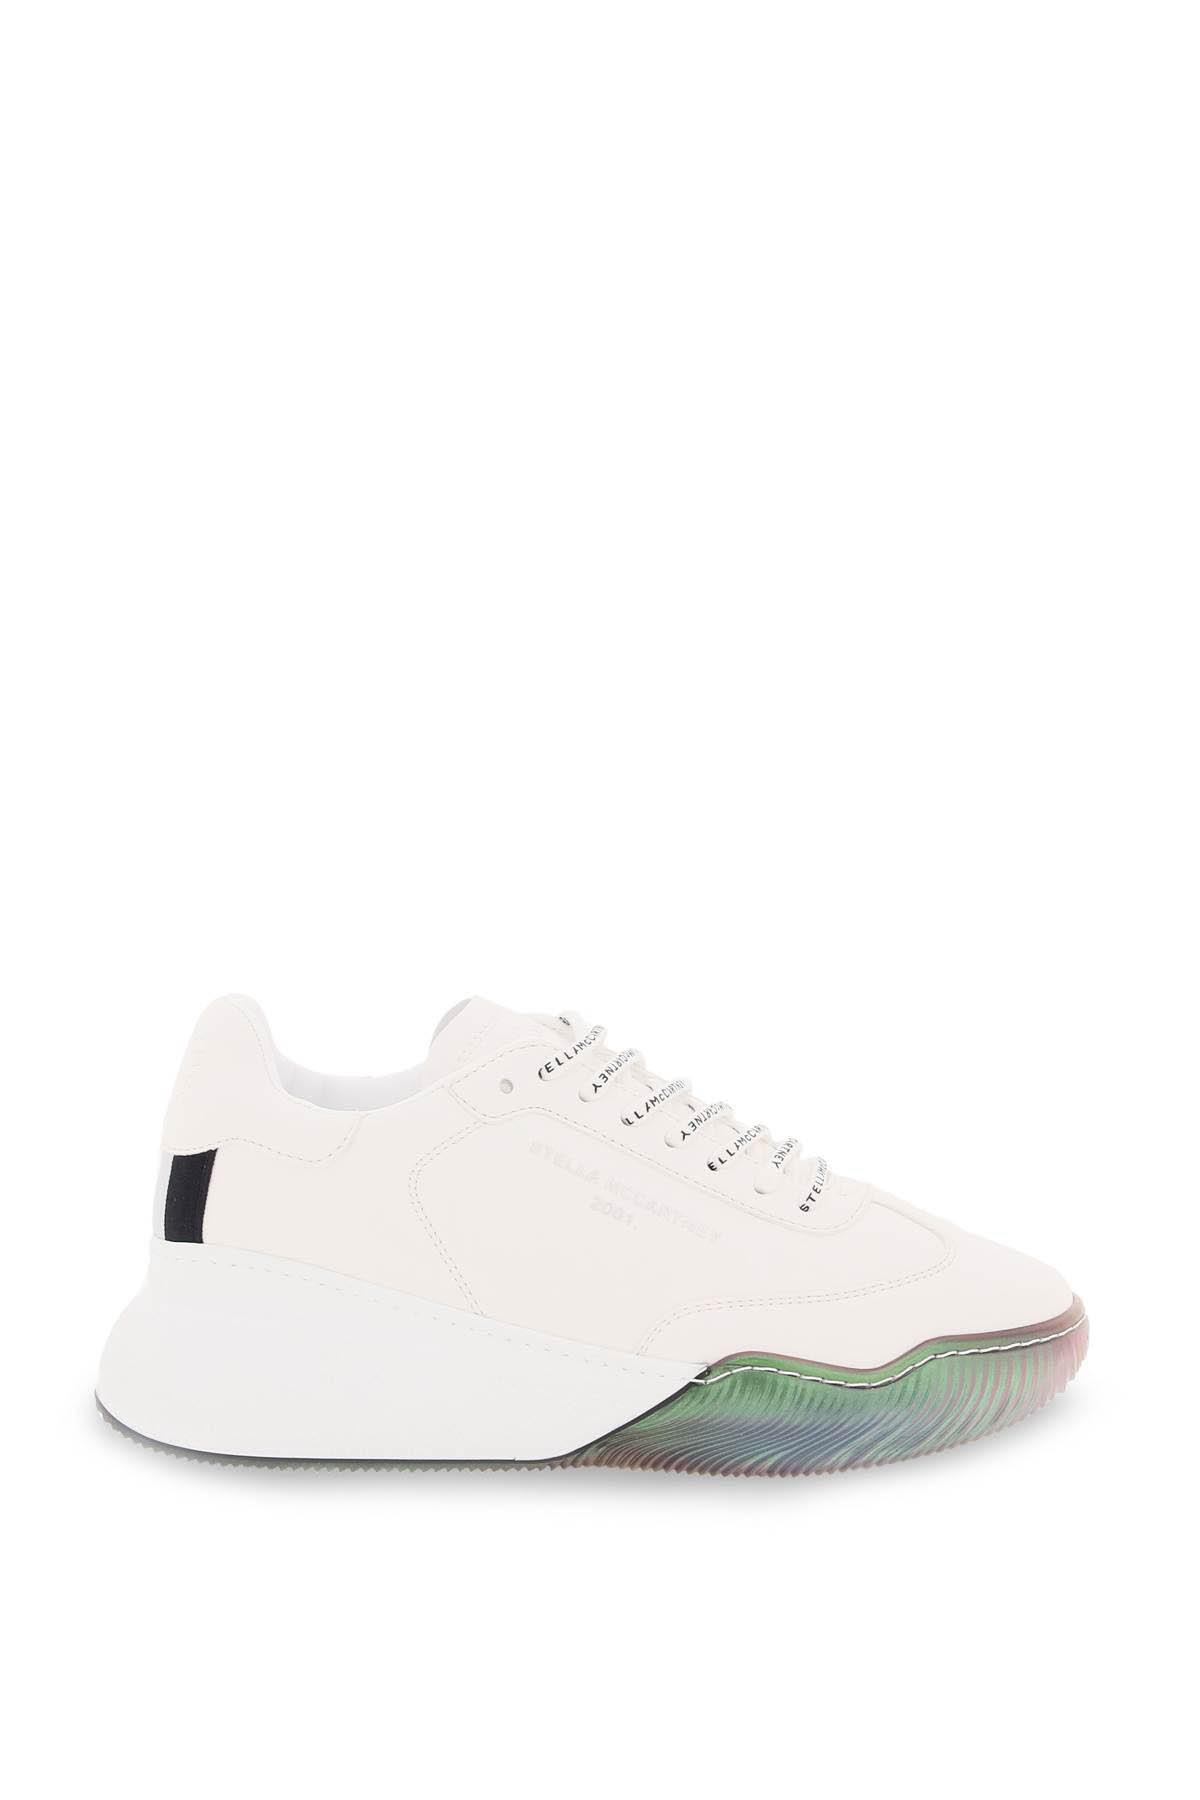 STELLA Mc CARTNEY FAUX LEATHER TRAINER SNEAKERS